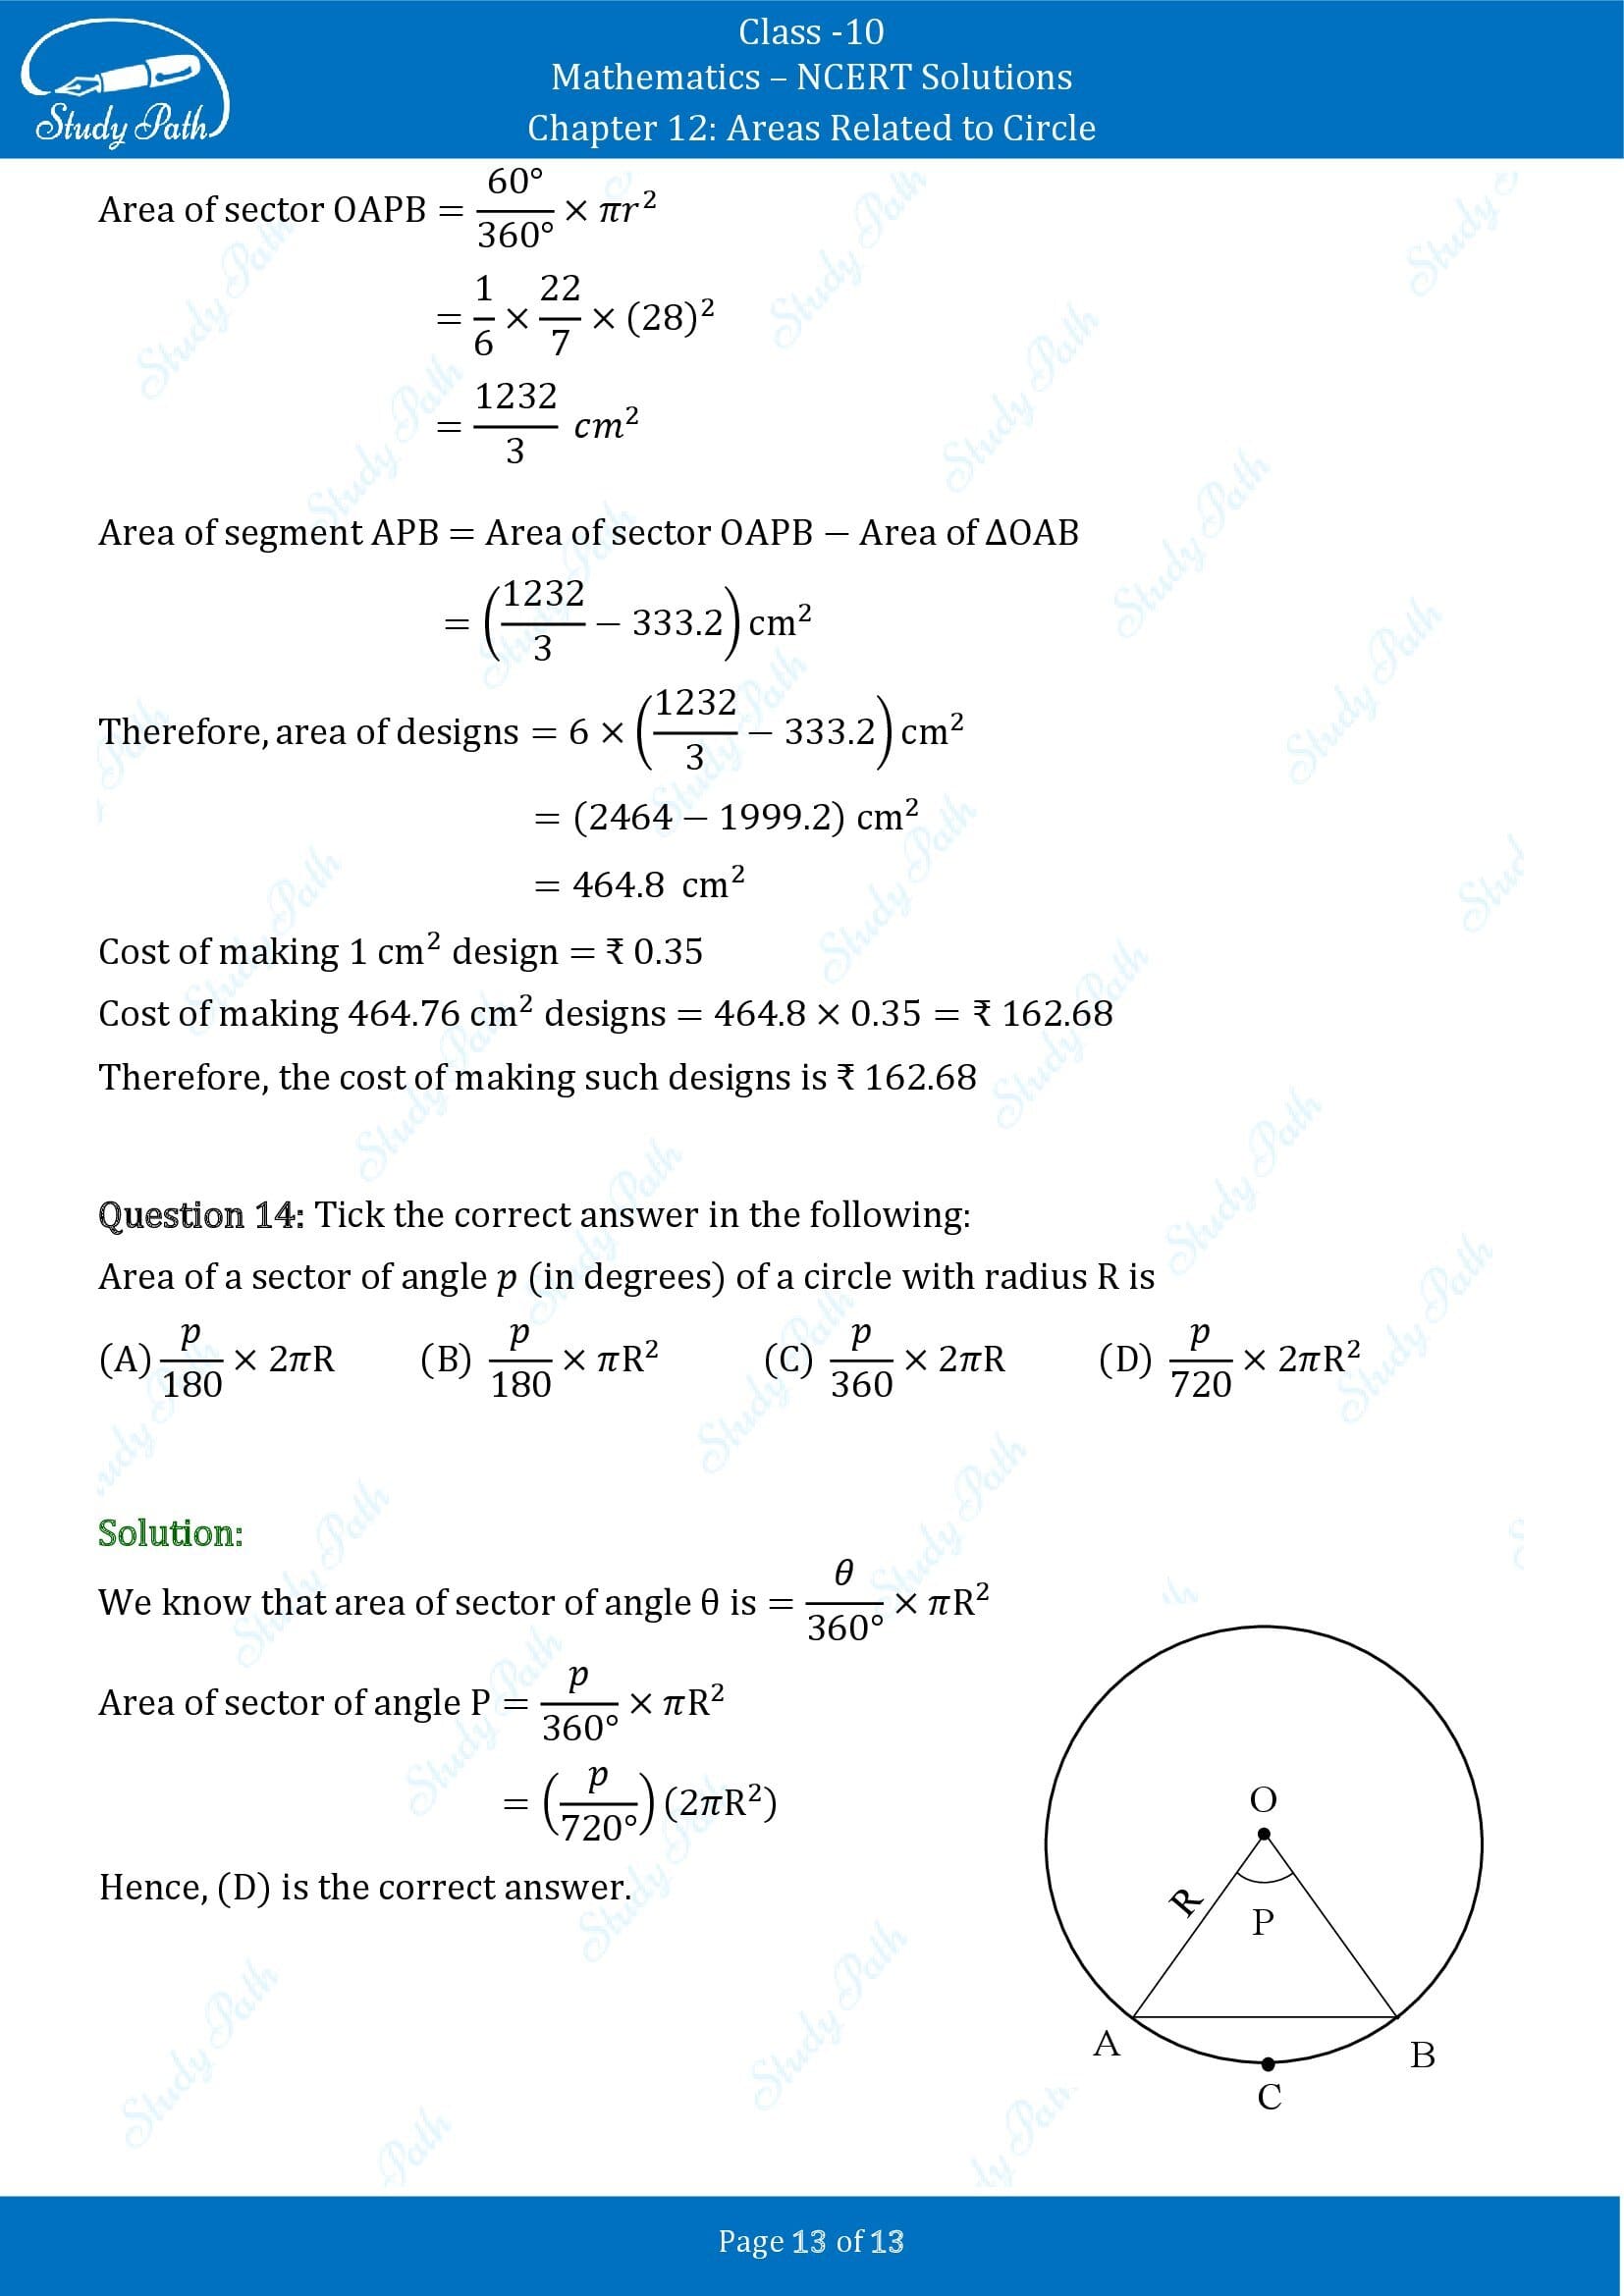 NCERT Solutions for Class 10 Maths Chapter 12 Areas Related to Circles Exercise 12.2 00013